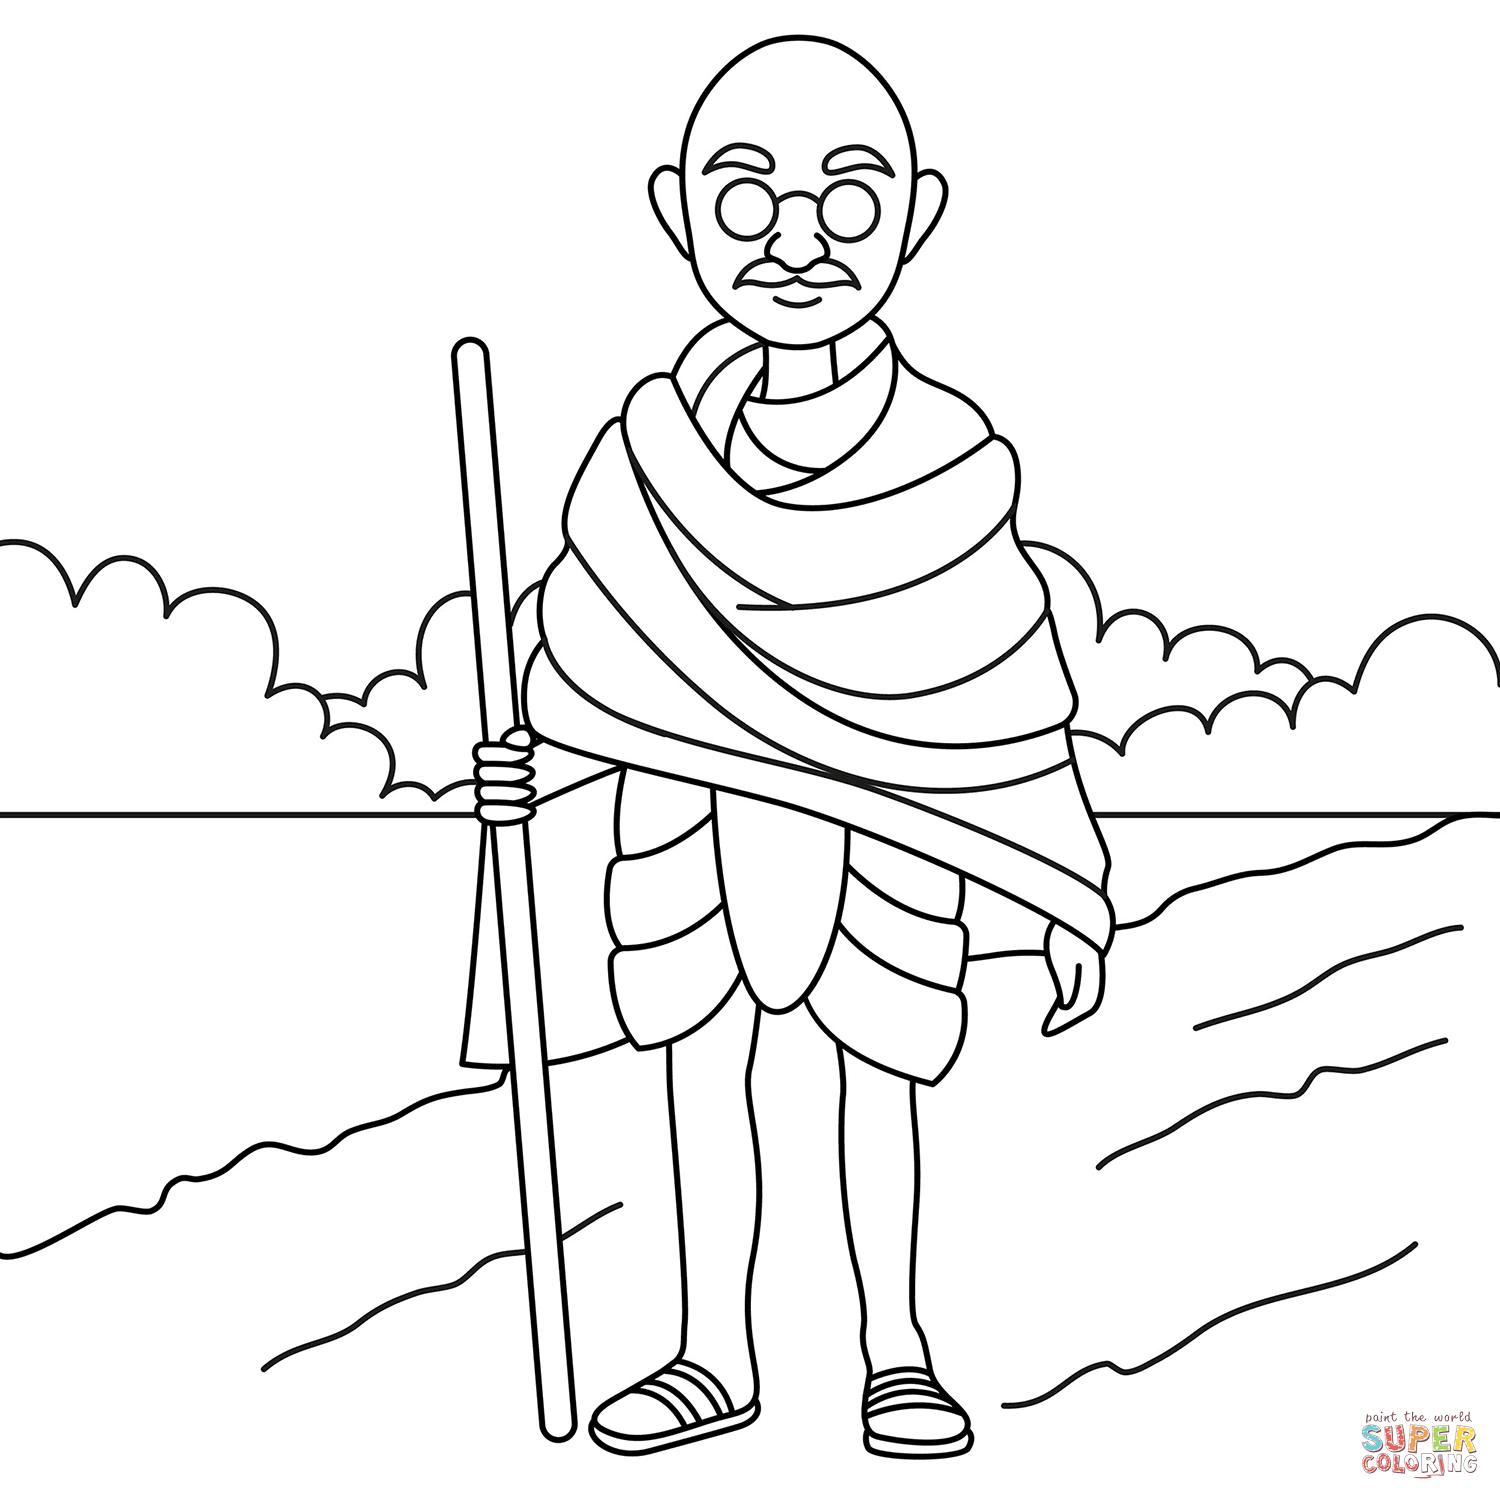 Gandhi coloring page | Free Printable Coloring Pages